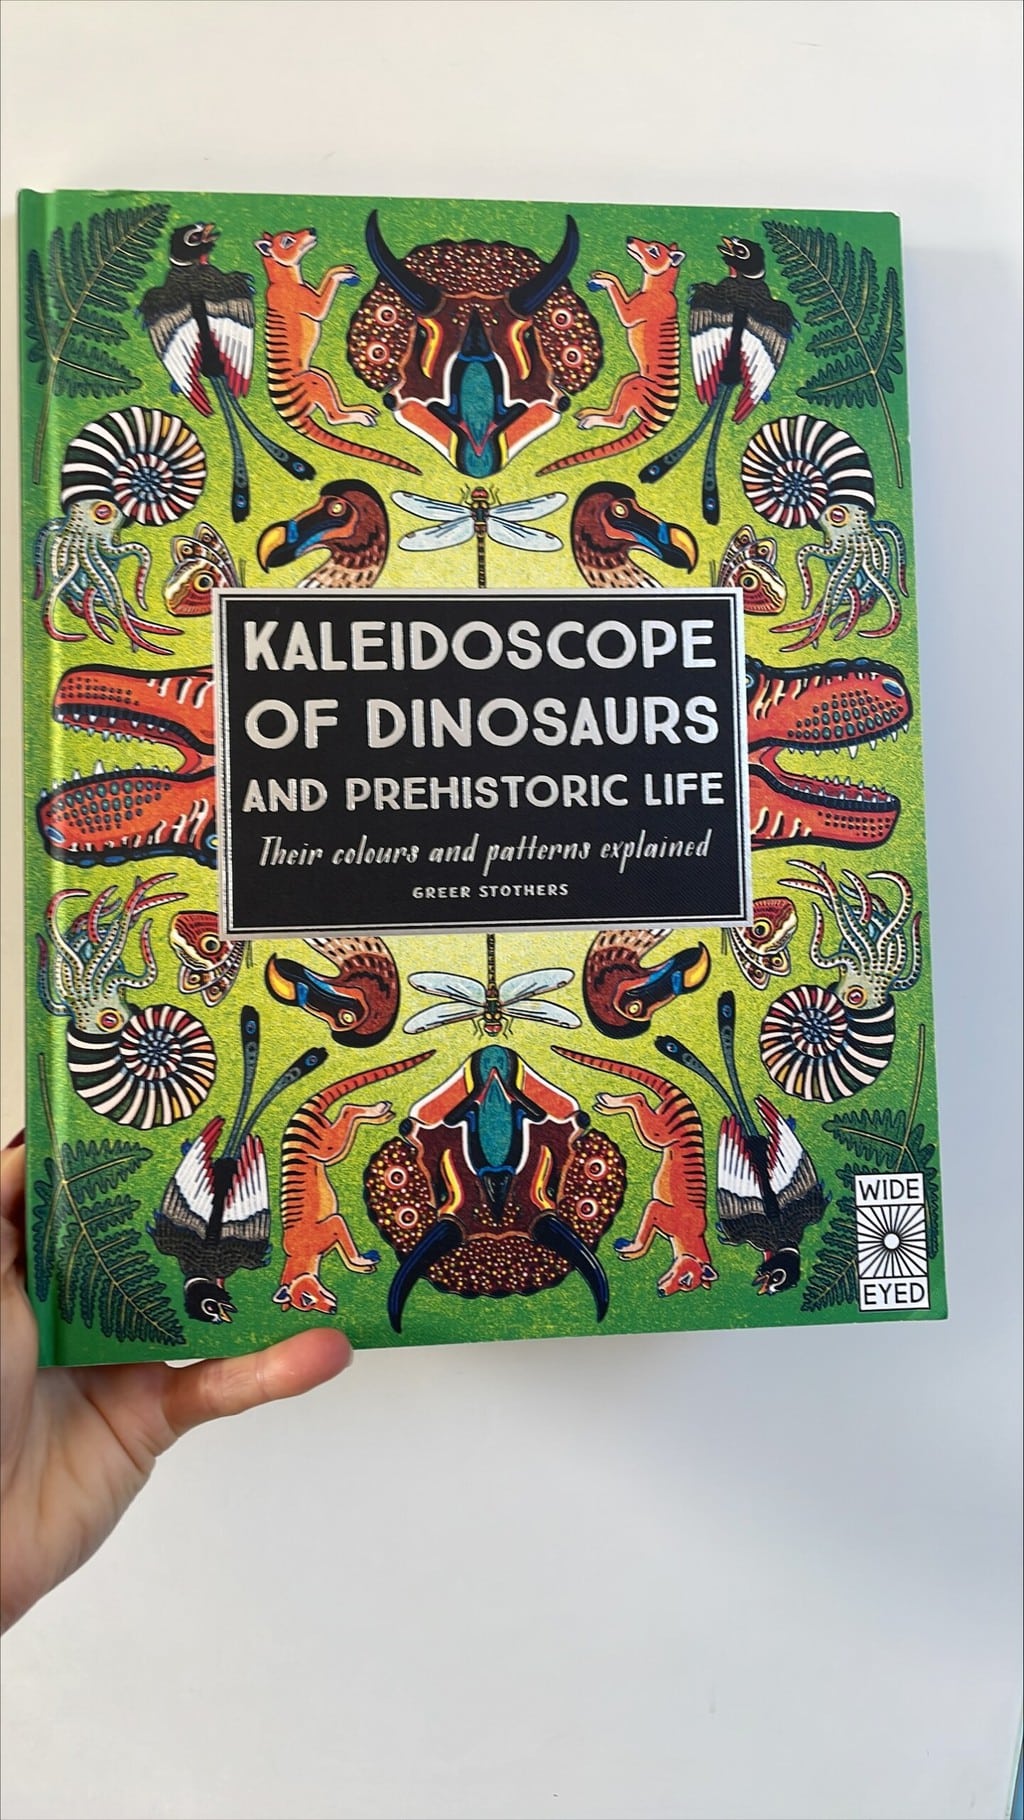 Kaleidescope of Dinosaurs and Prehistoric Life – Greer Stothers (author and illustrator), Wide Eyed Editions (imprint of Quarto) (publisher)